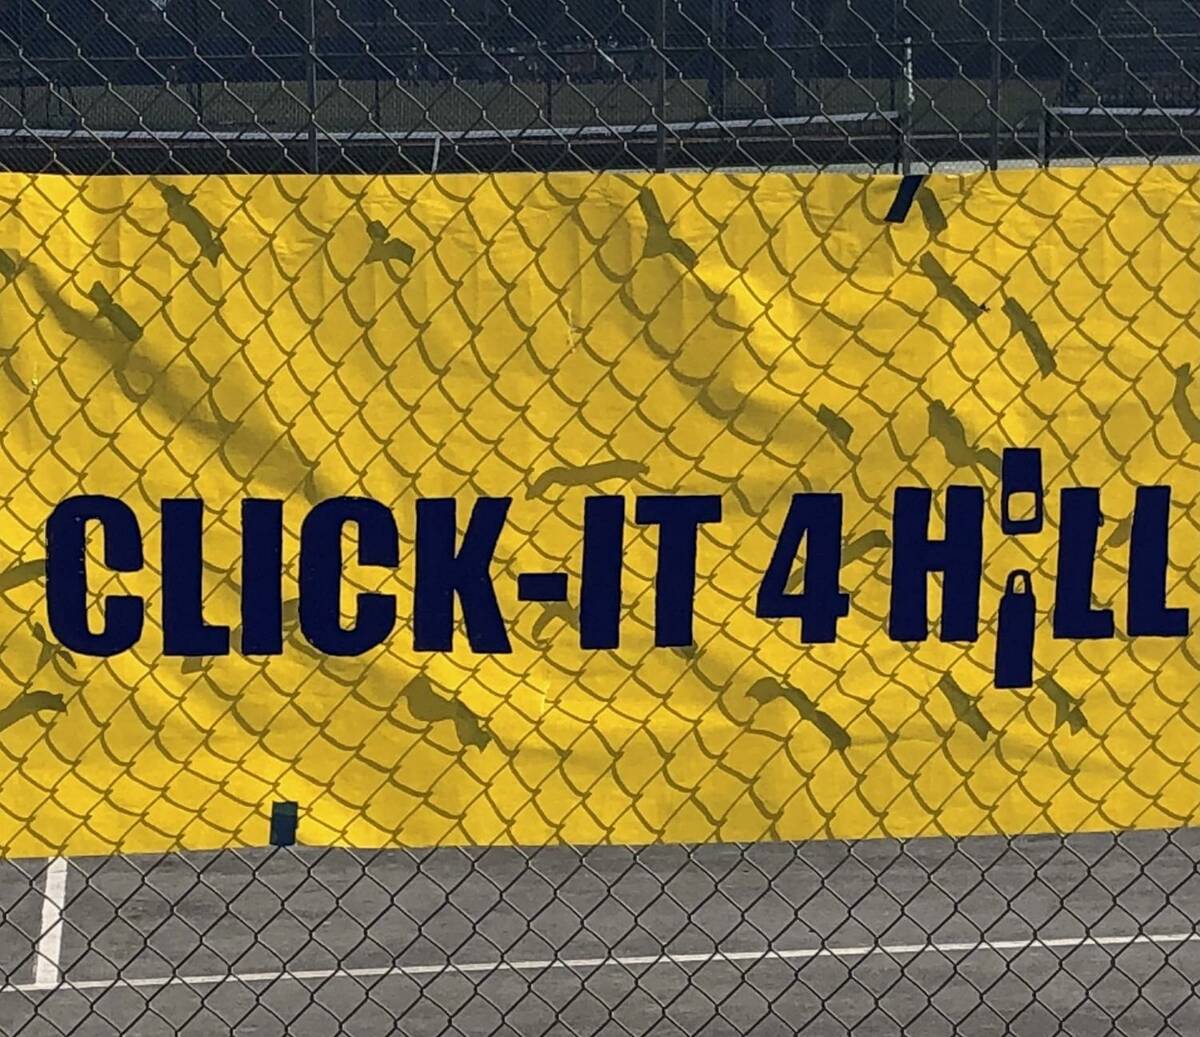 A banner that reads "Click-it 4 Hill is displayed on campus at Shadow Ridge High School. The sc ...